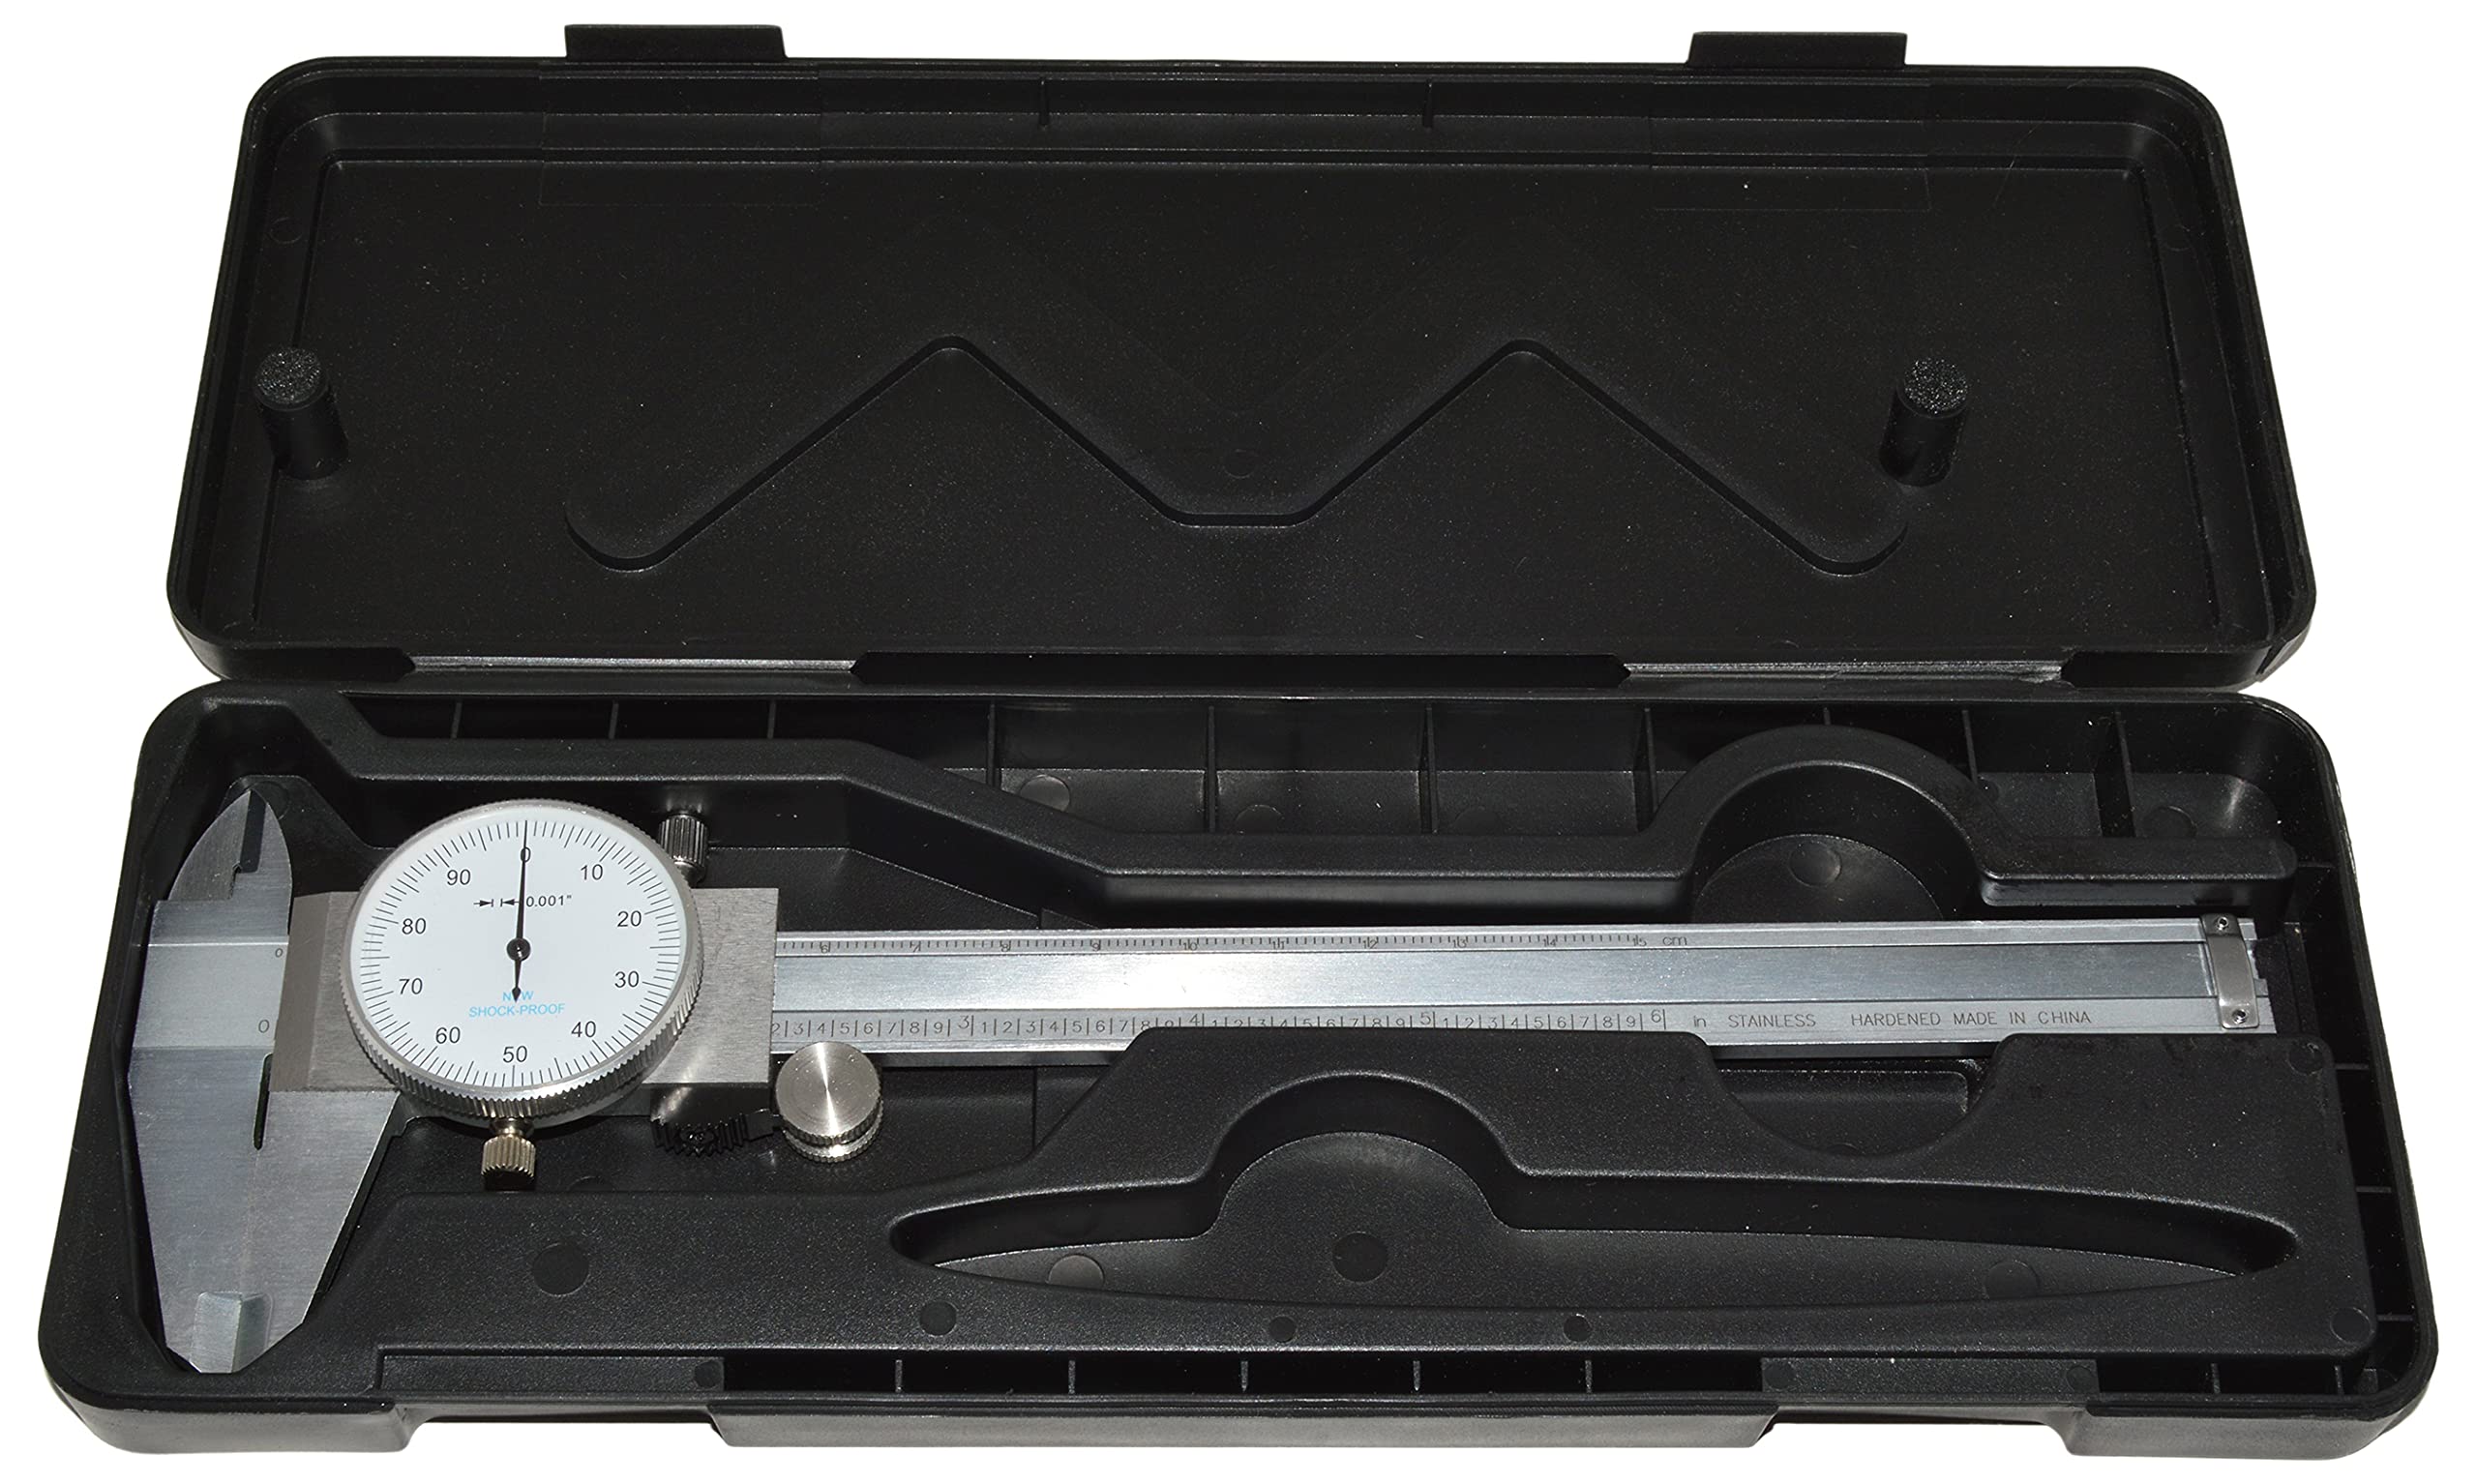 Utility Dial Caliper - 6 Inch with 0.001" Precision, Stainless Steel, Shockproof by Science Purchase